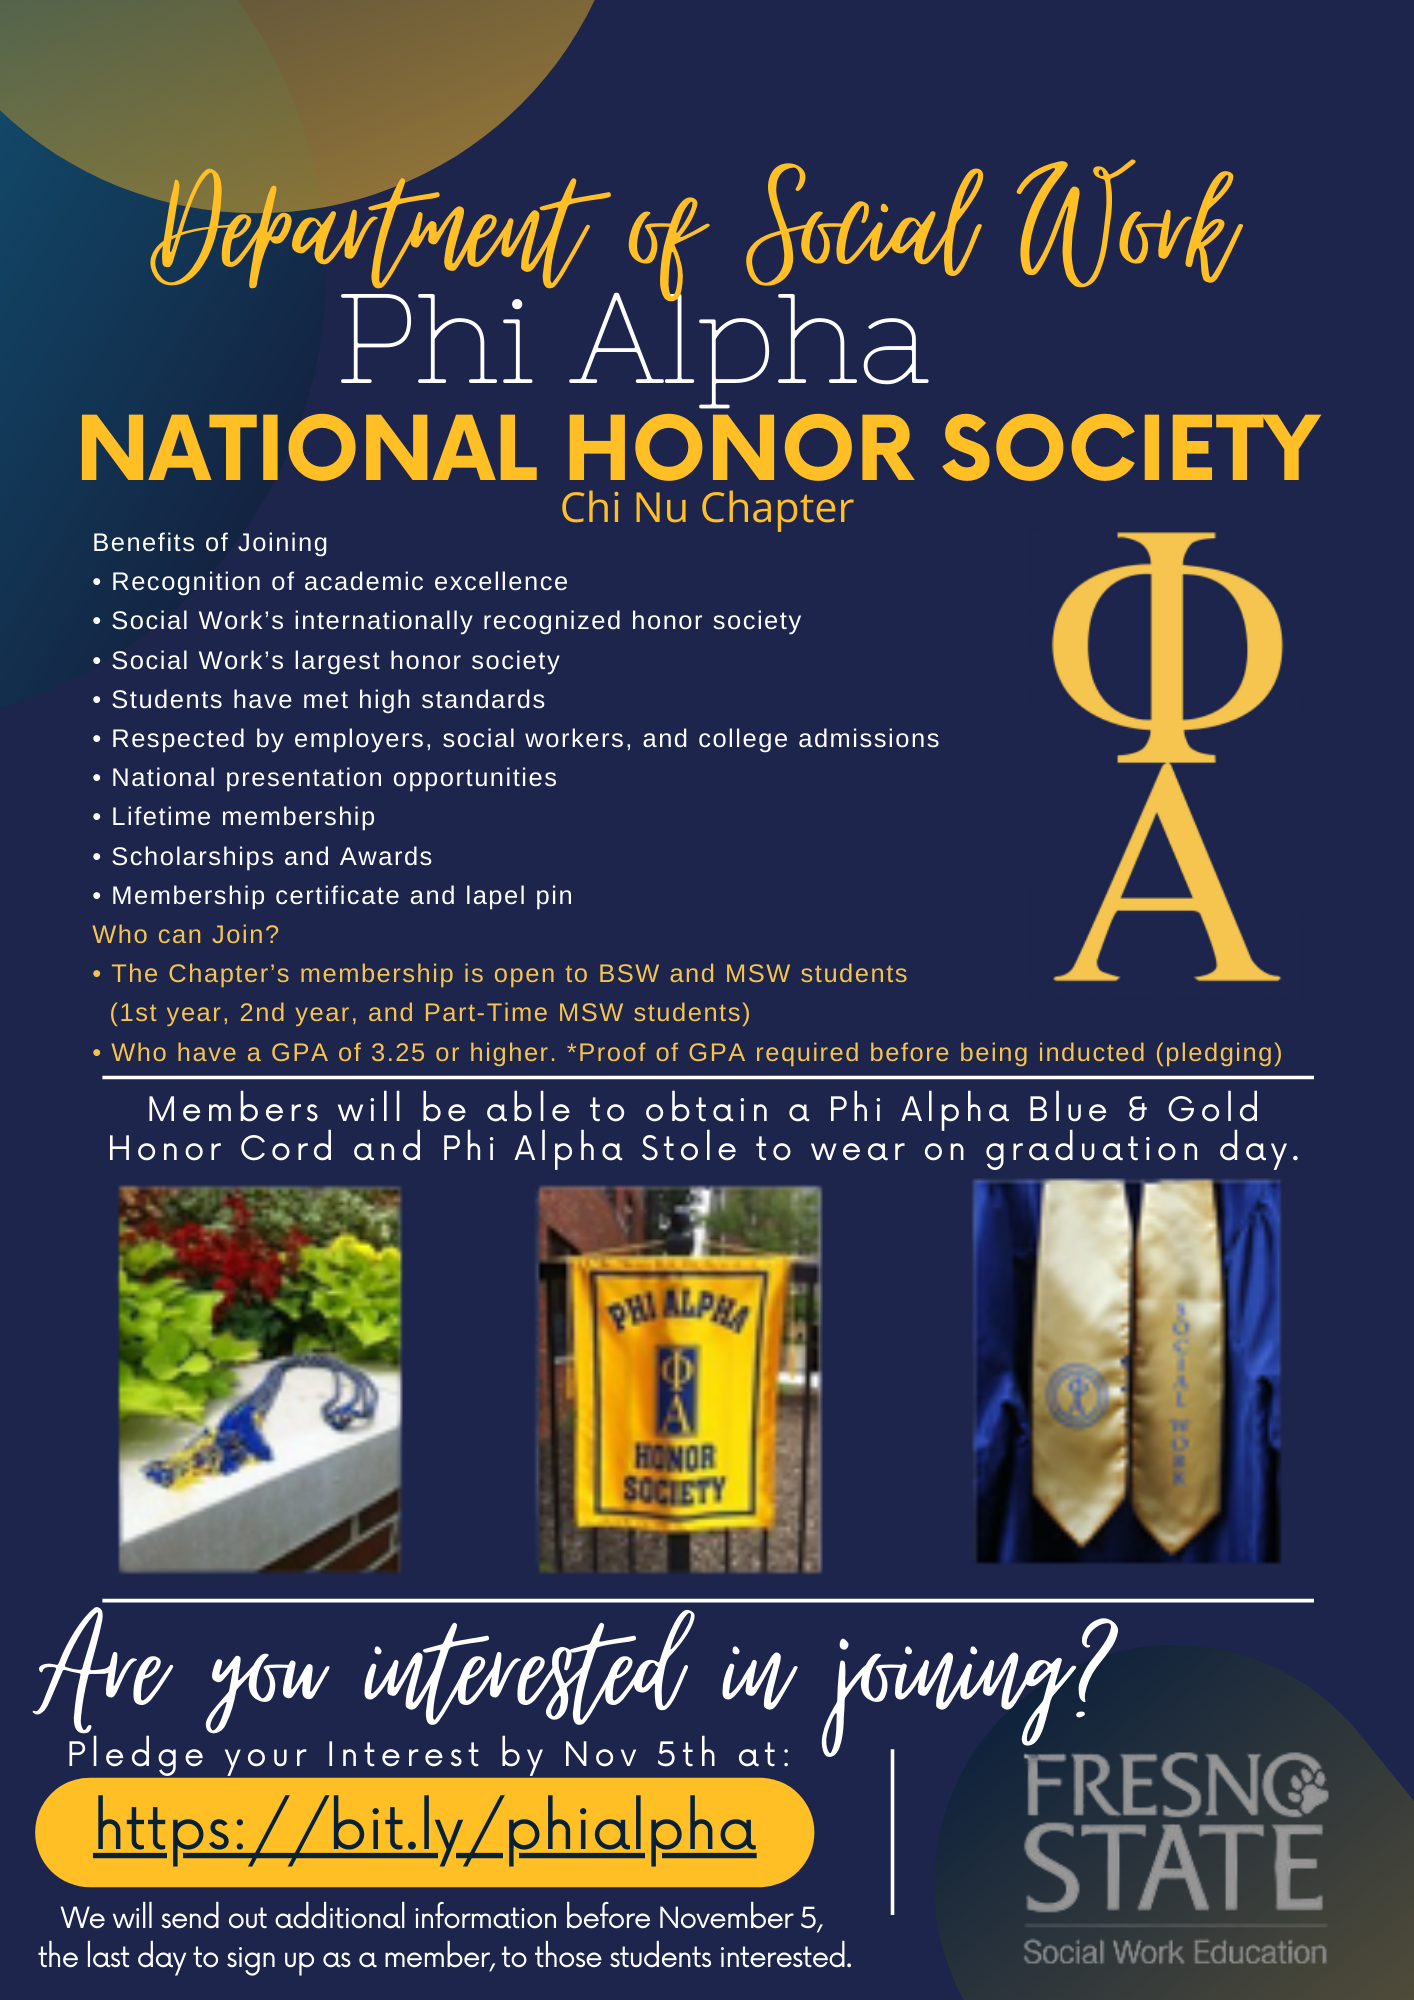 Department of Social Work Education. Phi Alpha National Honor Society - Chi Nu Chapter. Membership is open to BSW and MSW students, must have 3.25 GPA or higher. Members will obtain a blue and gold honor cord and stole to wear on graduation day. Contact Candy Madrigal at cmadrigal@csufresno.edu if intersted.